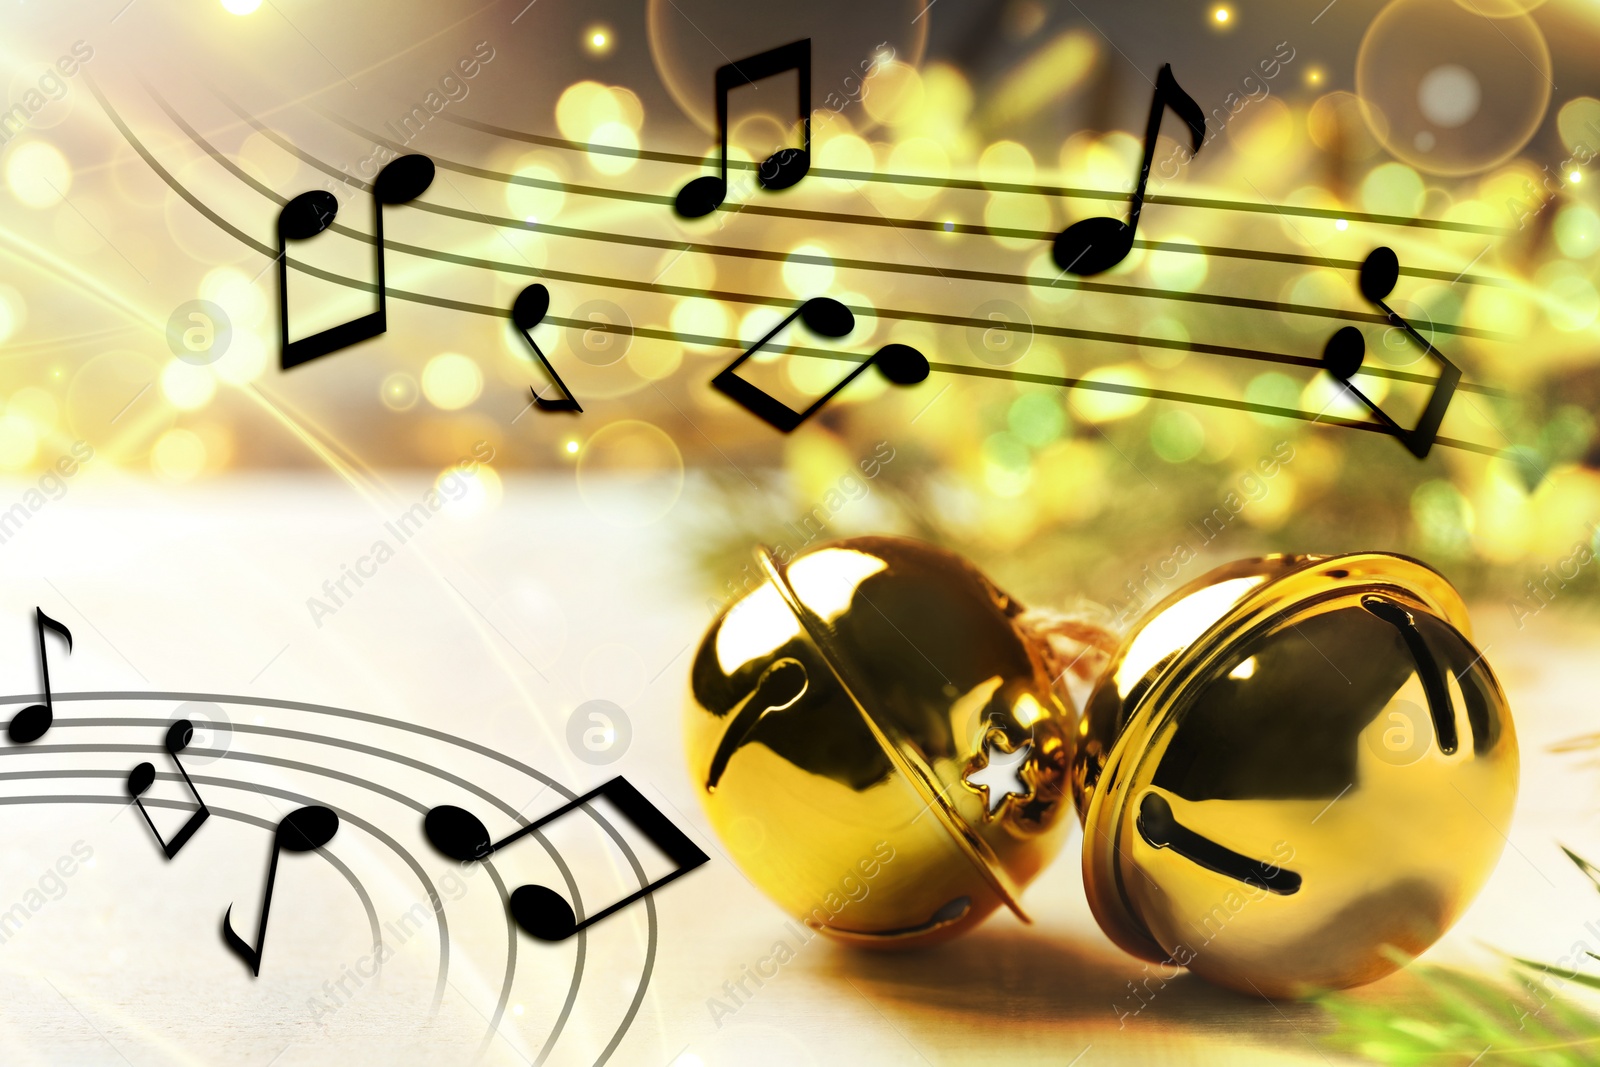 Image of Music notes and jingle bells on blurred background, bokeh effect. Christmas and New Year melody